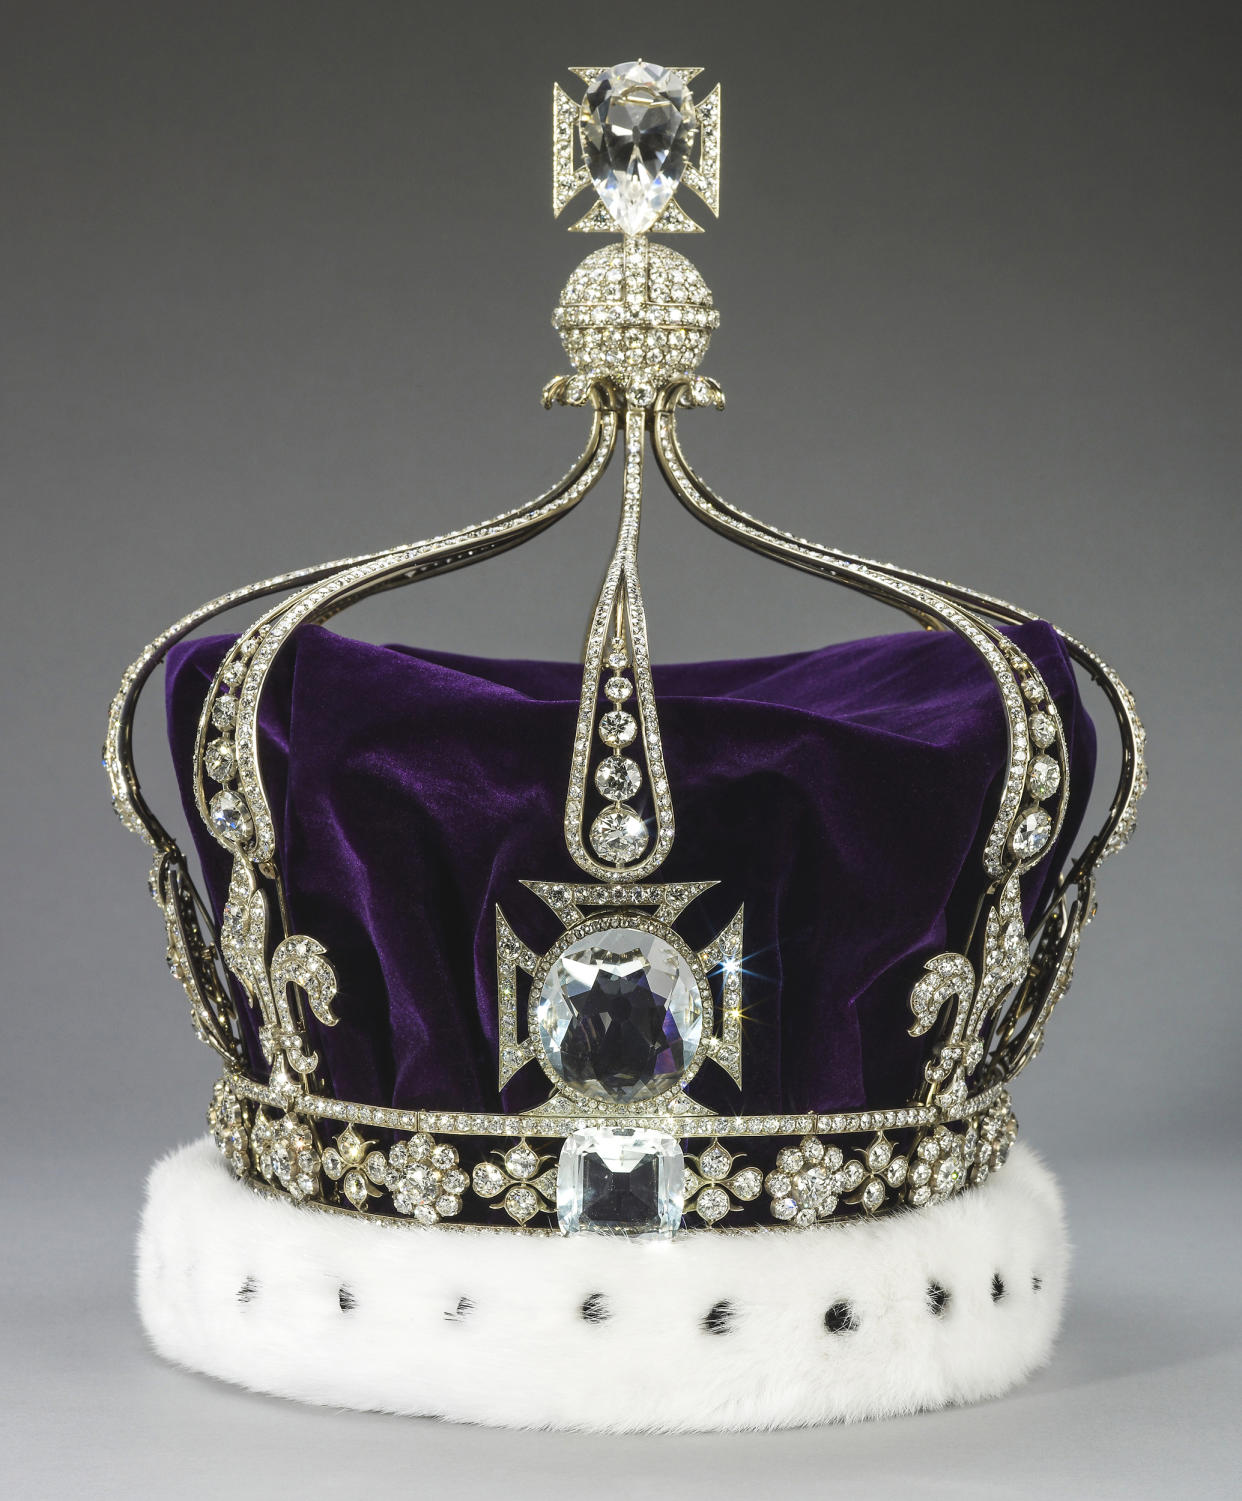 Queen Mary's Crown. (Royal Collection Trust /  His Majesty King Charles III 2023)